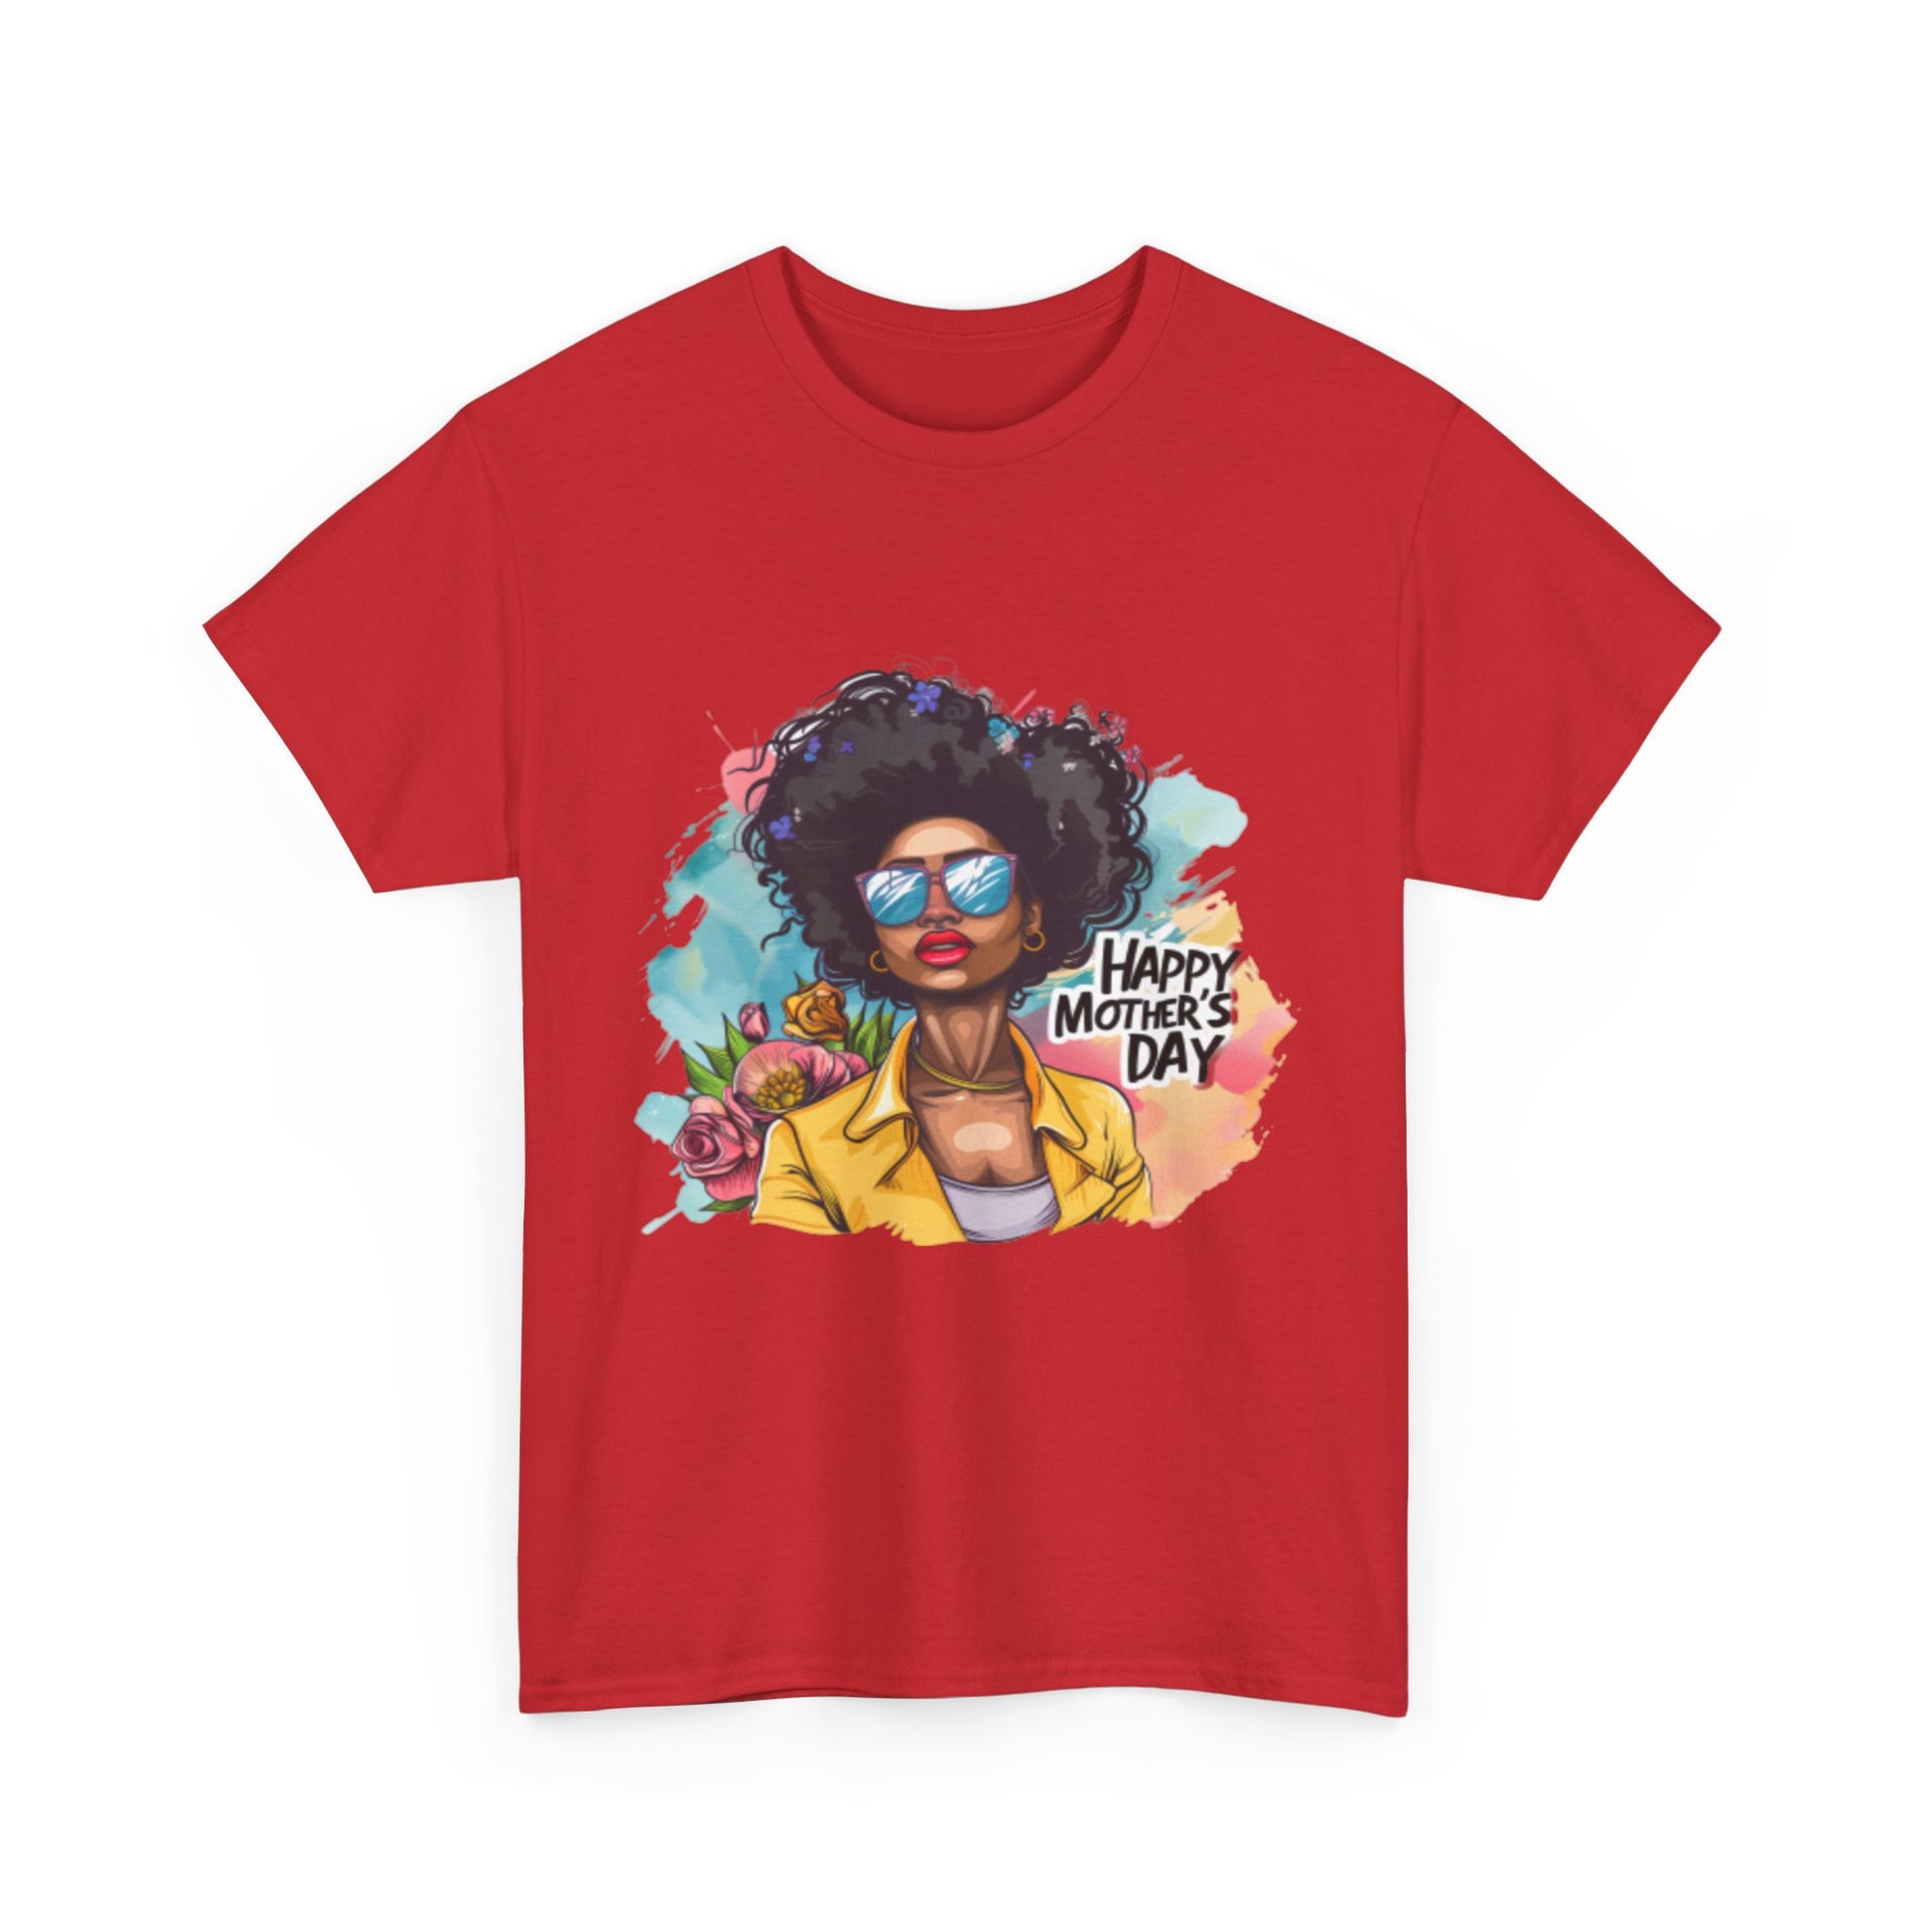 Happy Mother's Day African American Mom Graphic Unisex Heavy Cotton Tee Cotton Funny Humorous Graphic Soft Premium Unisex Men Women Red T-shirt Birthday Gift-33